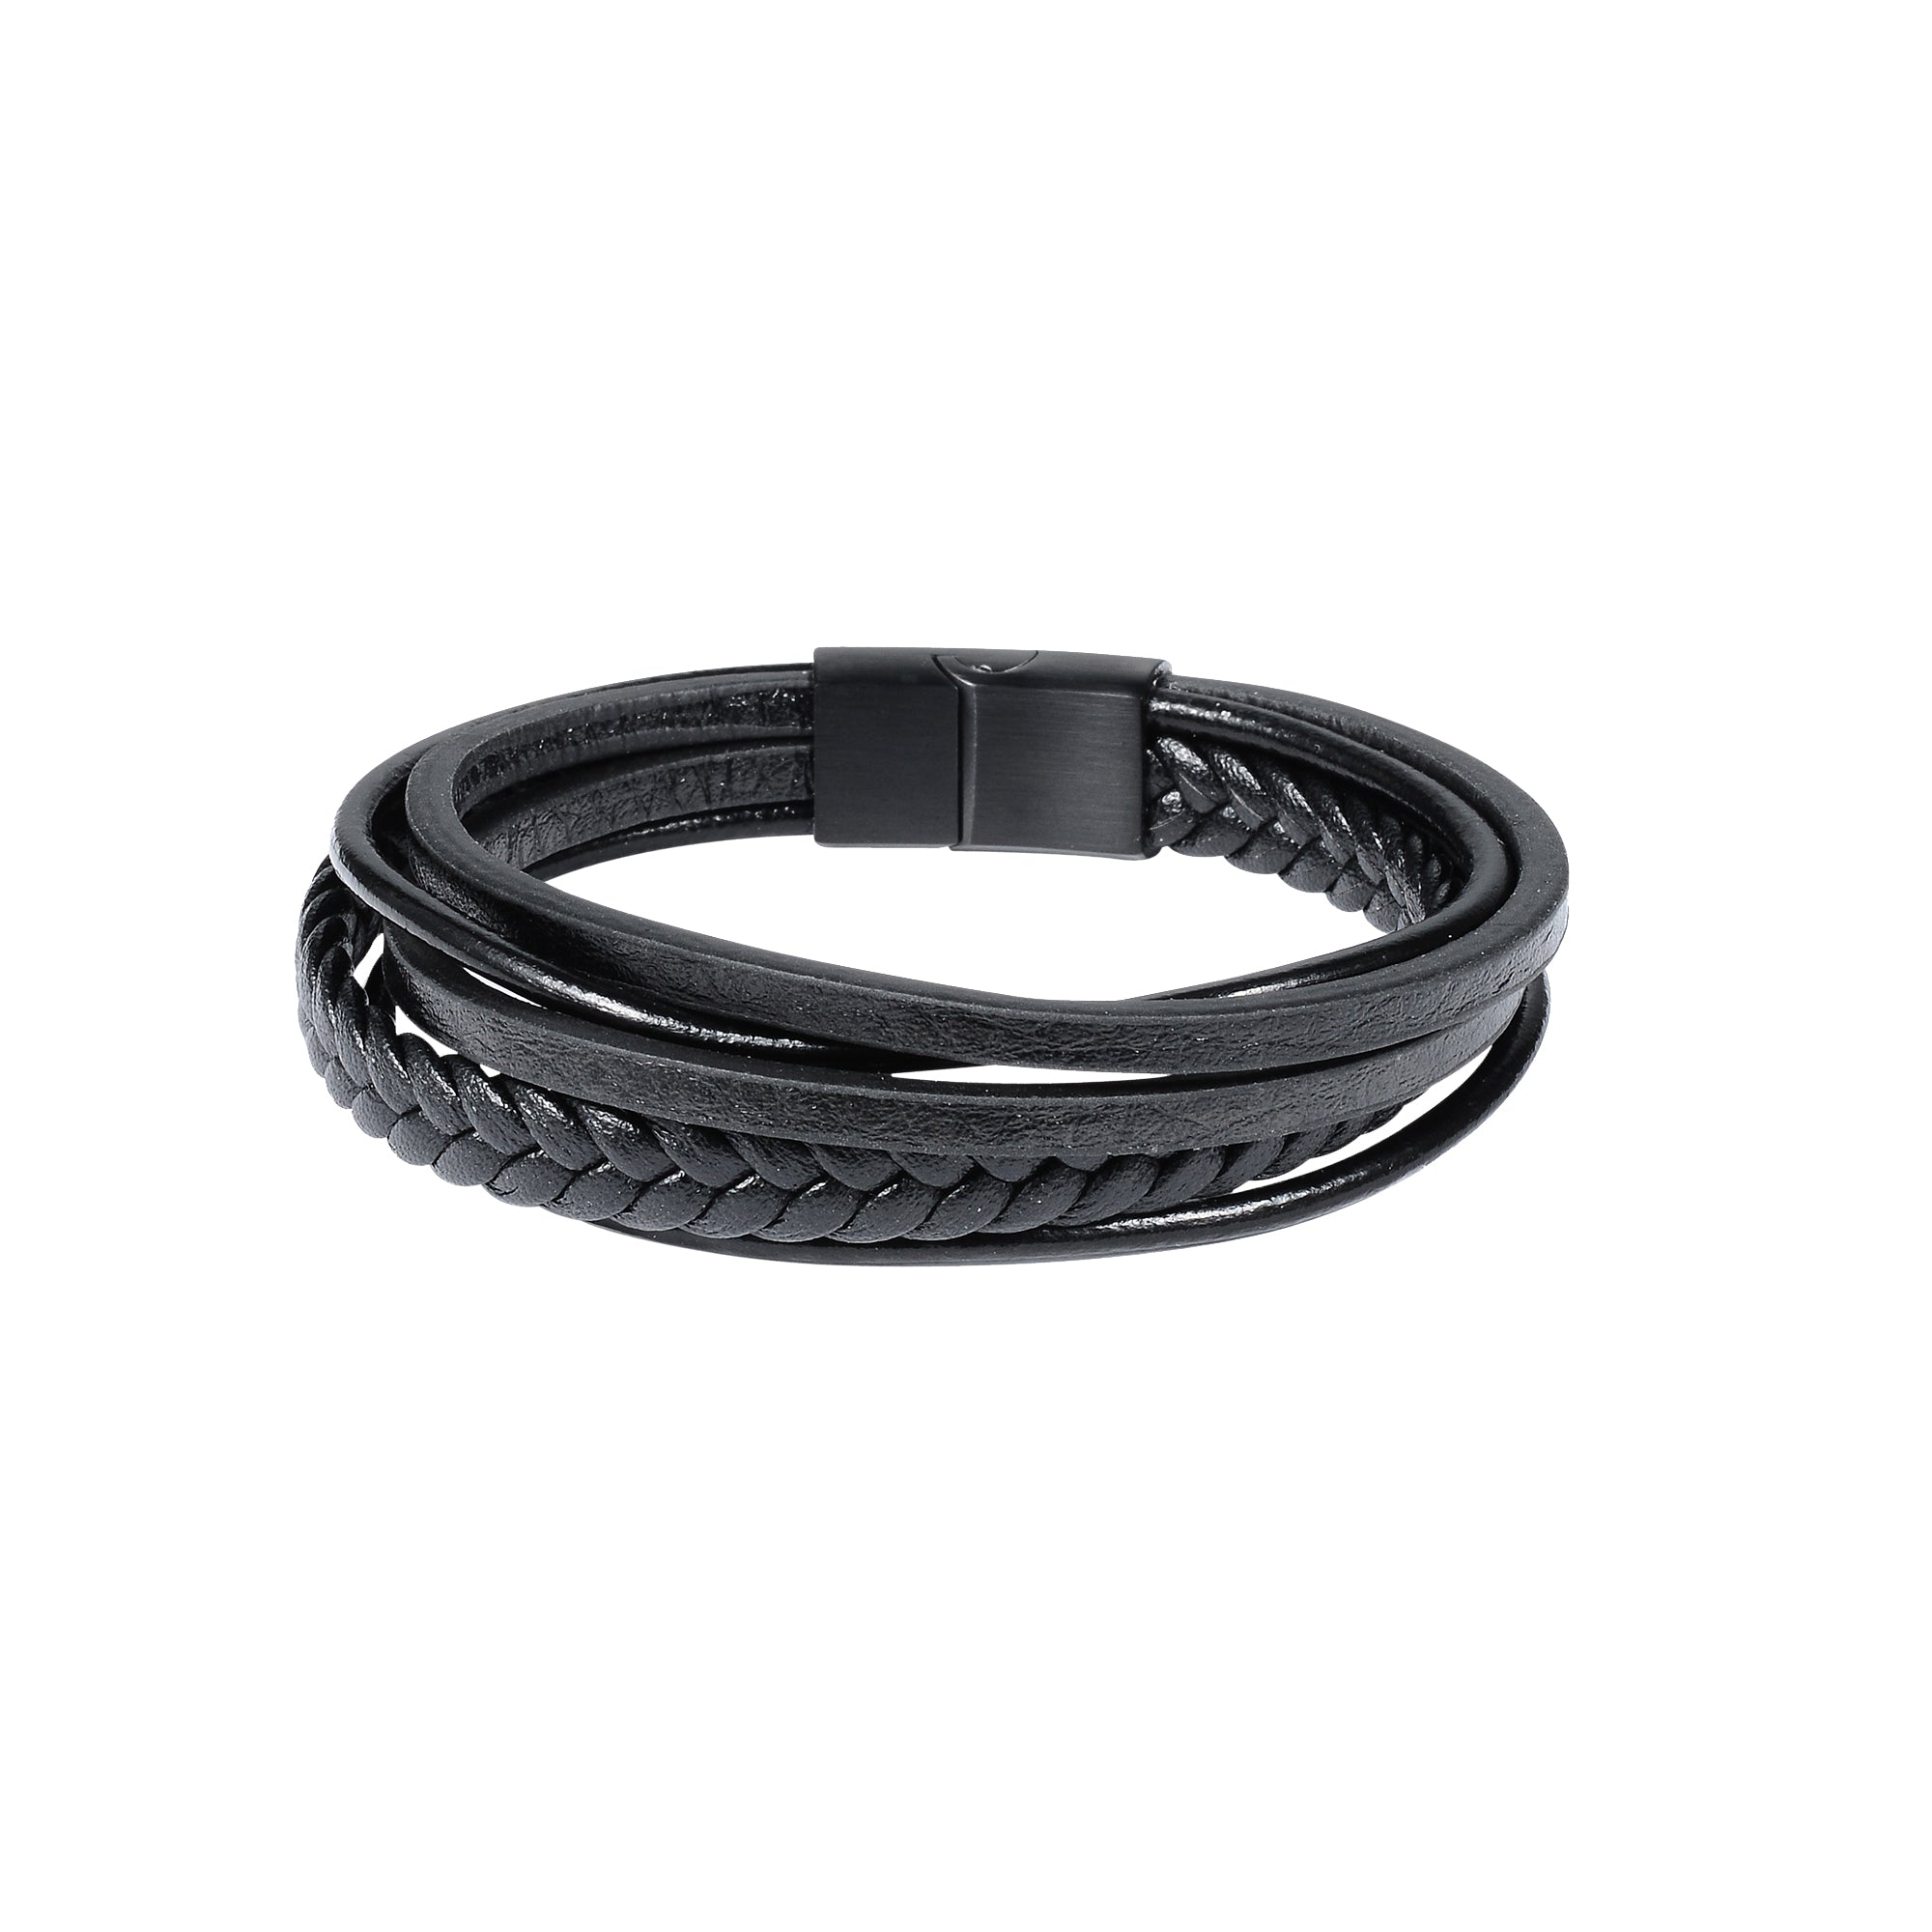 Black Layered Leather Braided Stainless Steel Bracelet